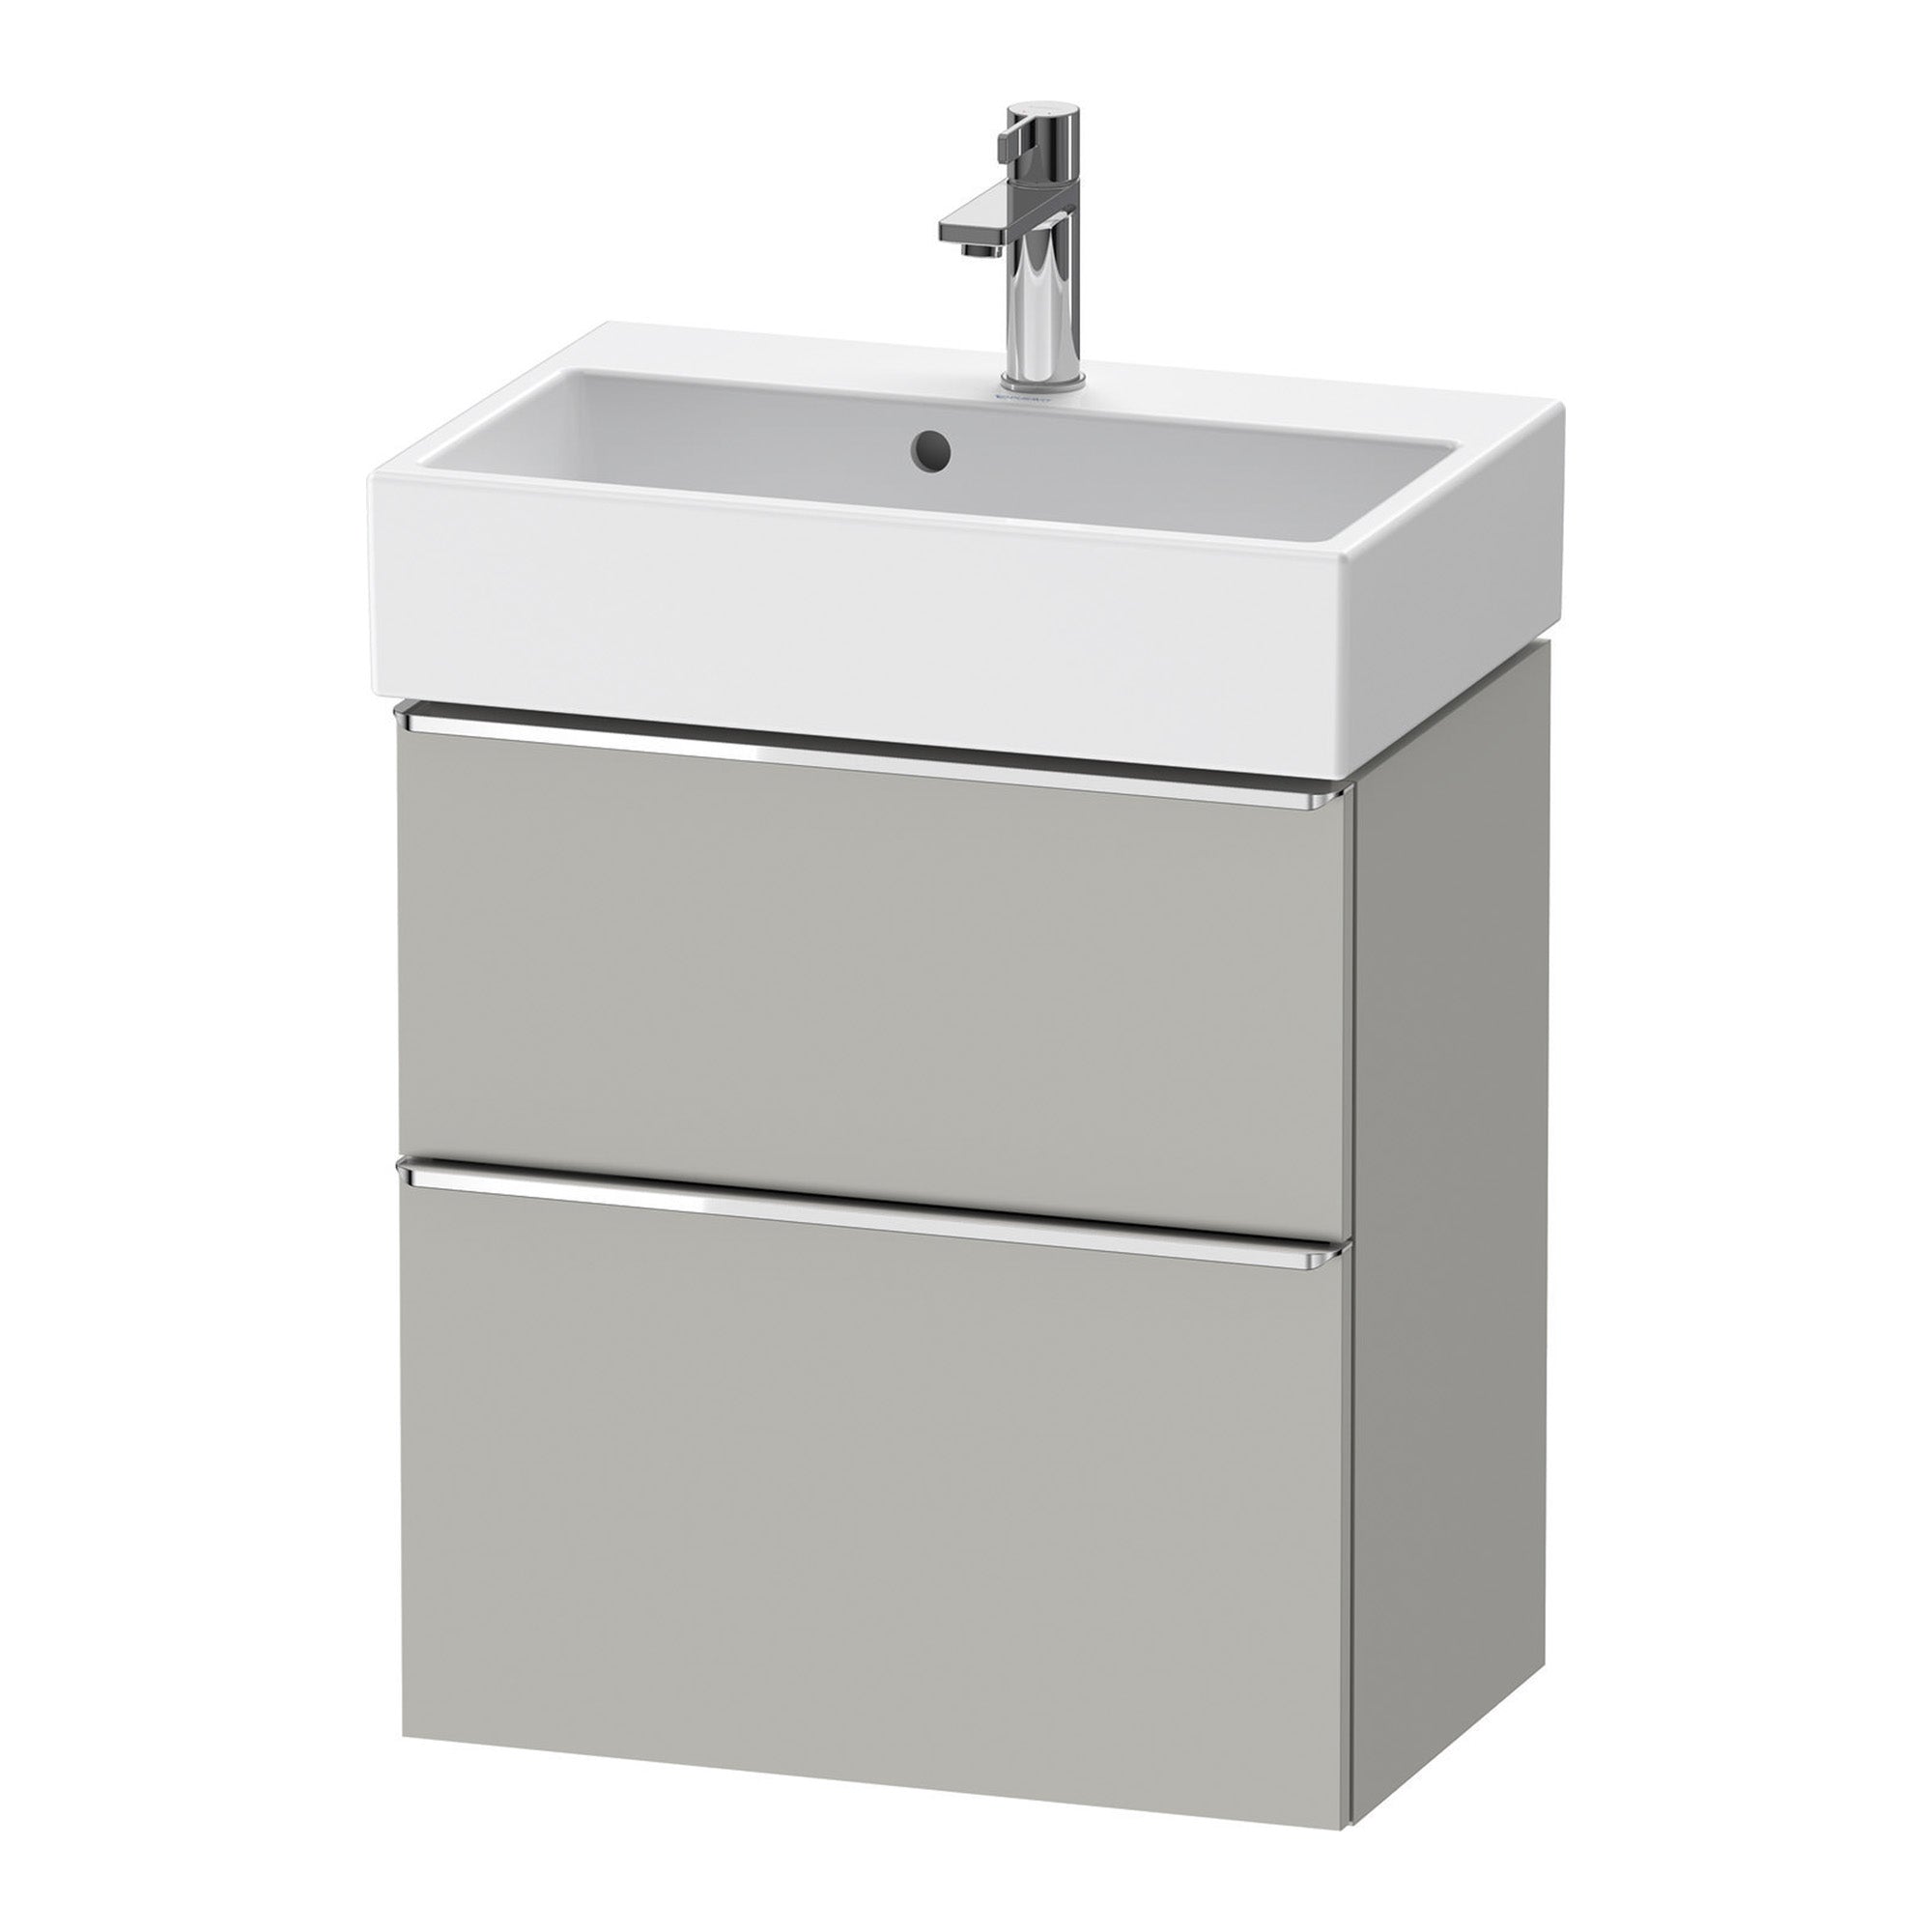 duravit d-neo 600 wall mounted vanity-unit with vero basin concrete grey chrome handles